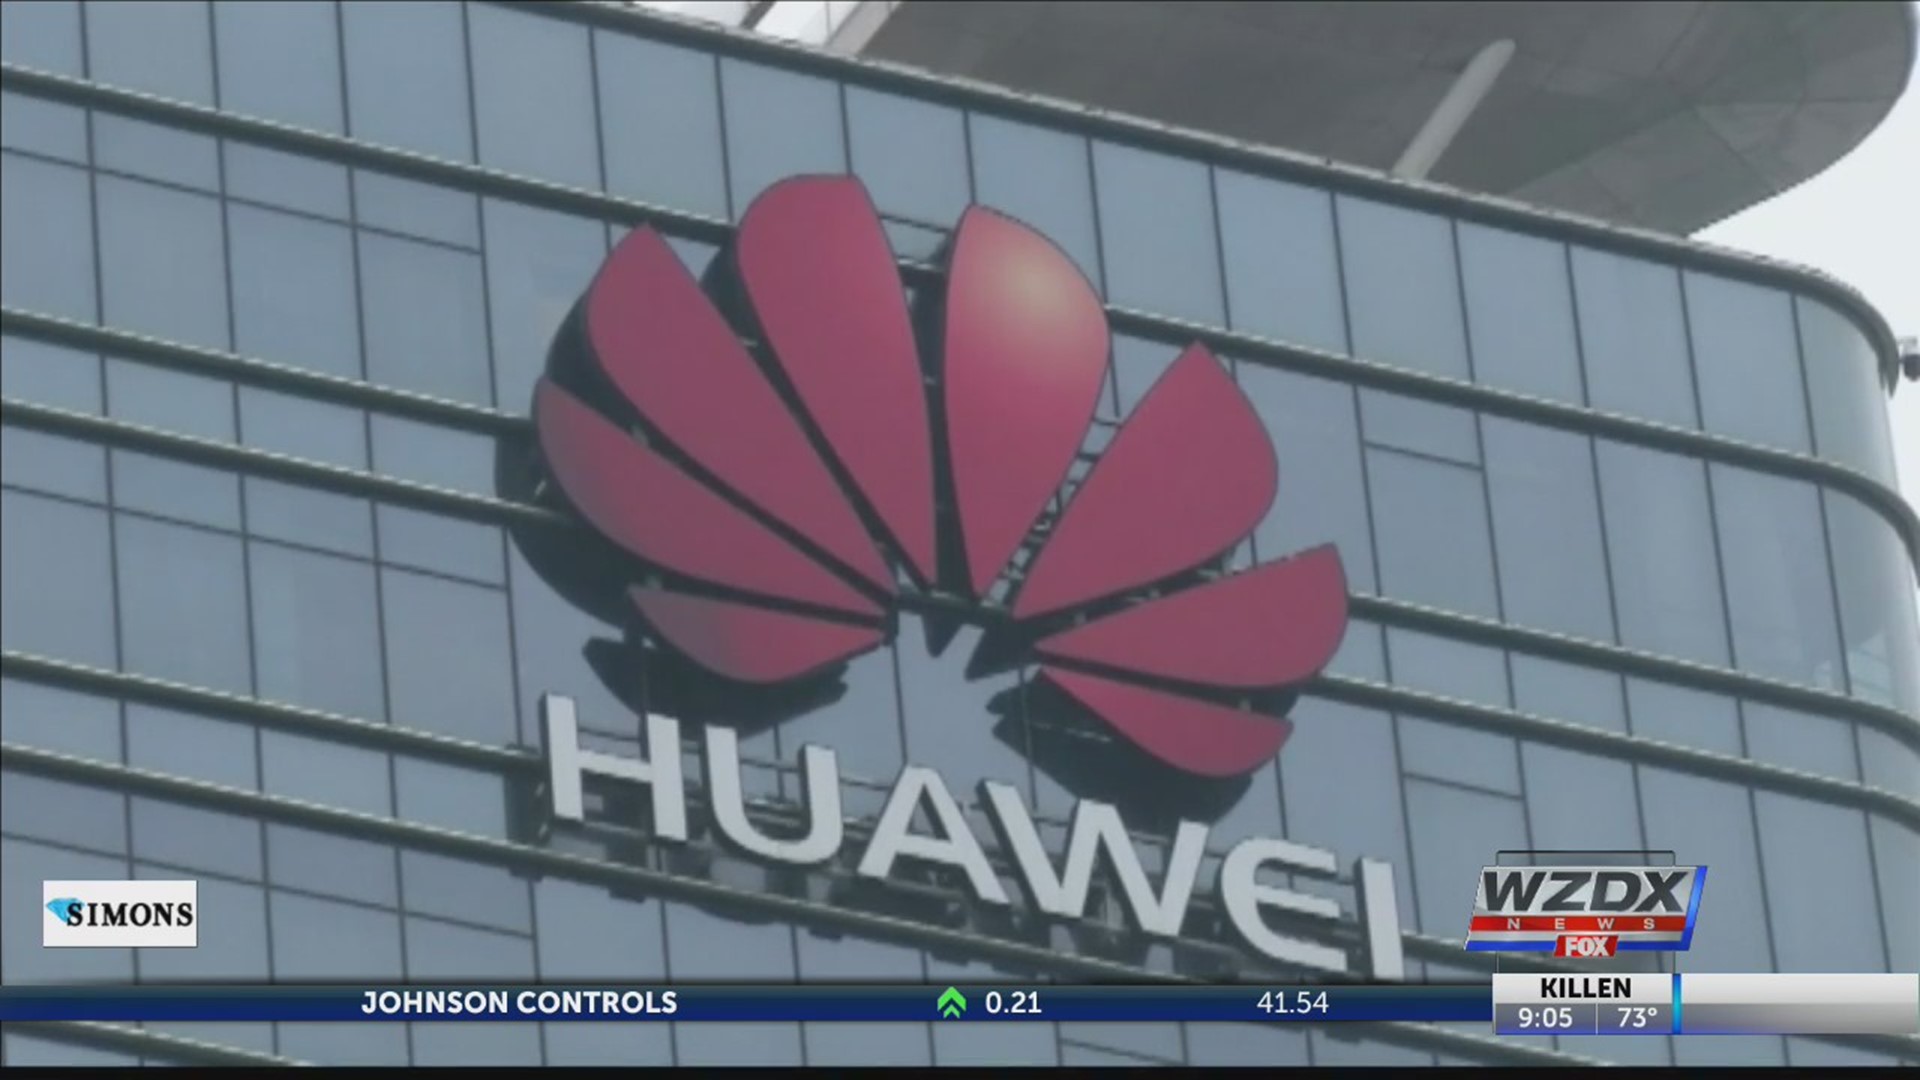 Chinese tech company Huawei set to lay off hundreds of workers in U.S. amid trade war.